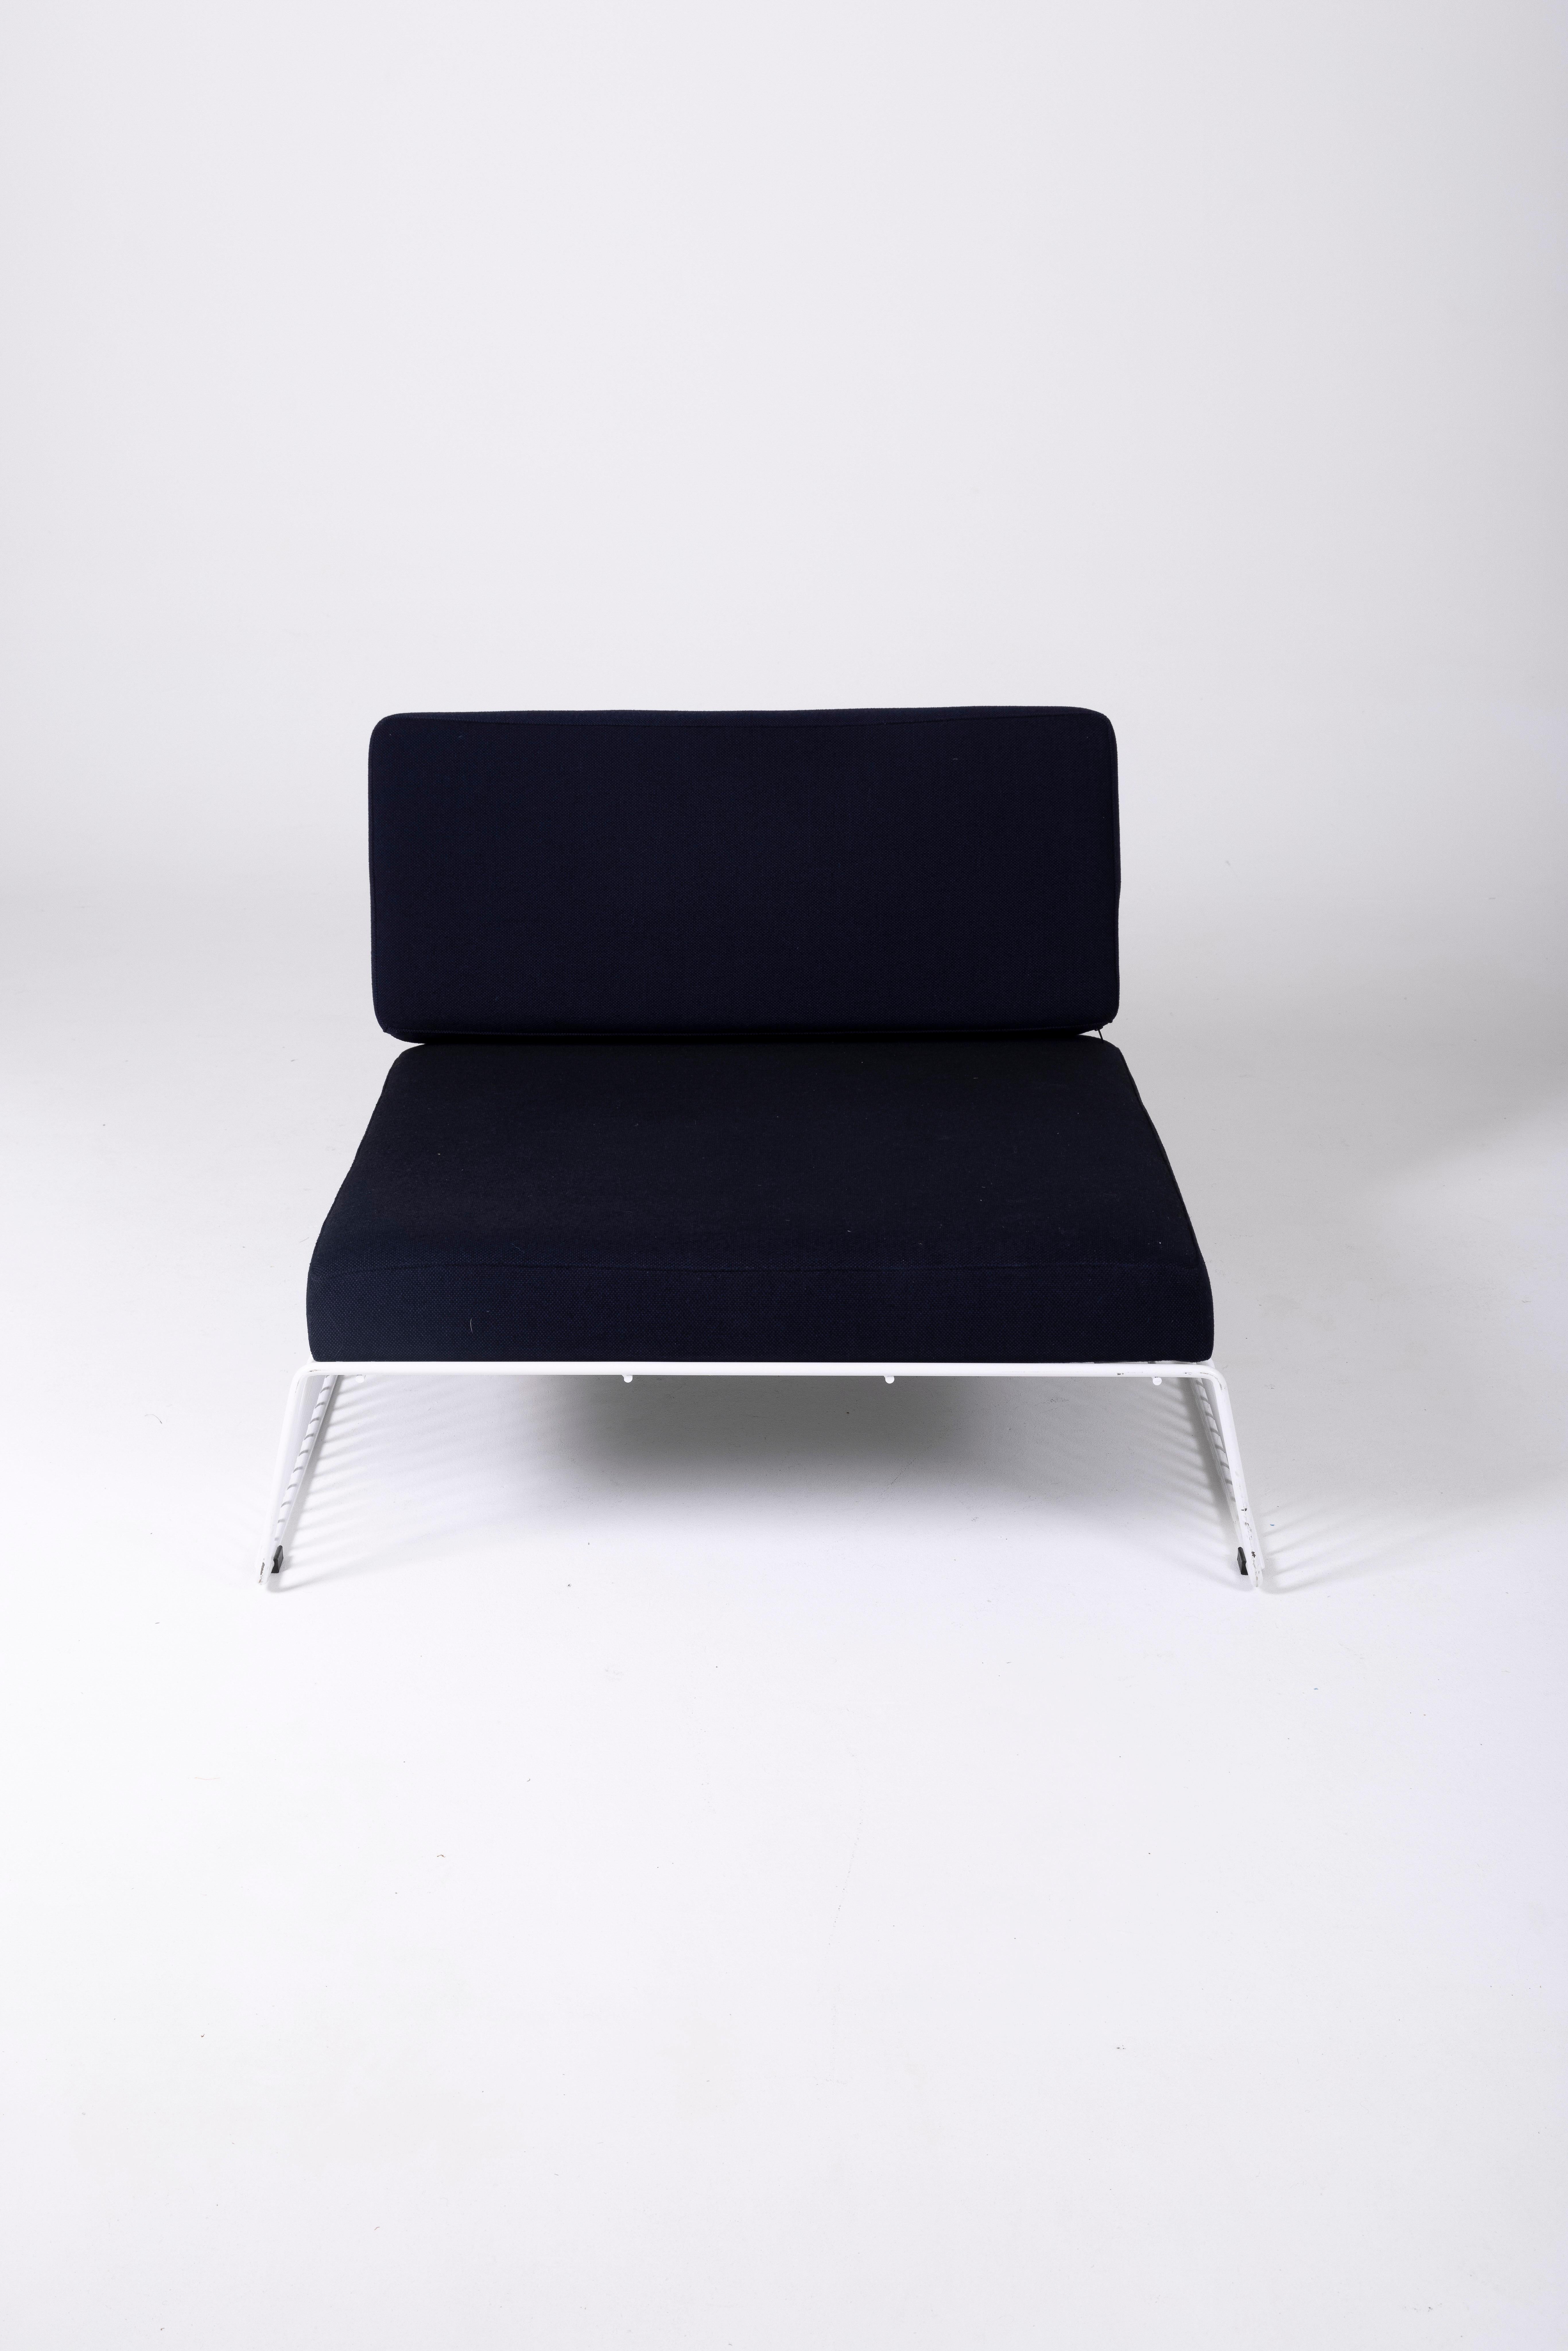 Texas model armchair by designer François Arnal, Atelier A edition. The seat and backrest are in blue fabric, and the tubular structure is lacquered white metal. This armchair pairs perfectly with furniture by designers Bruno Munari, Ettore